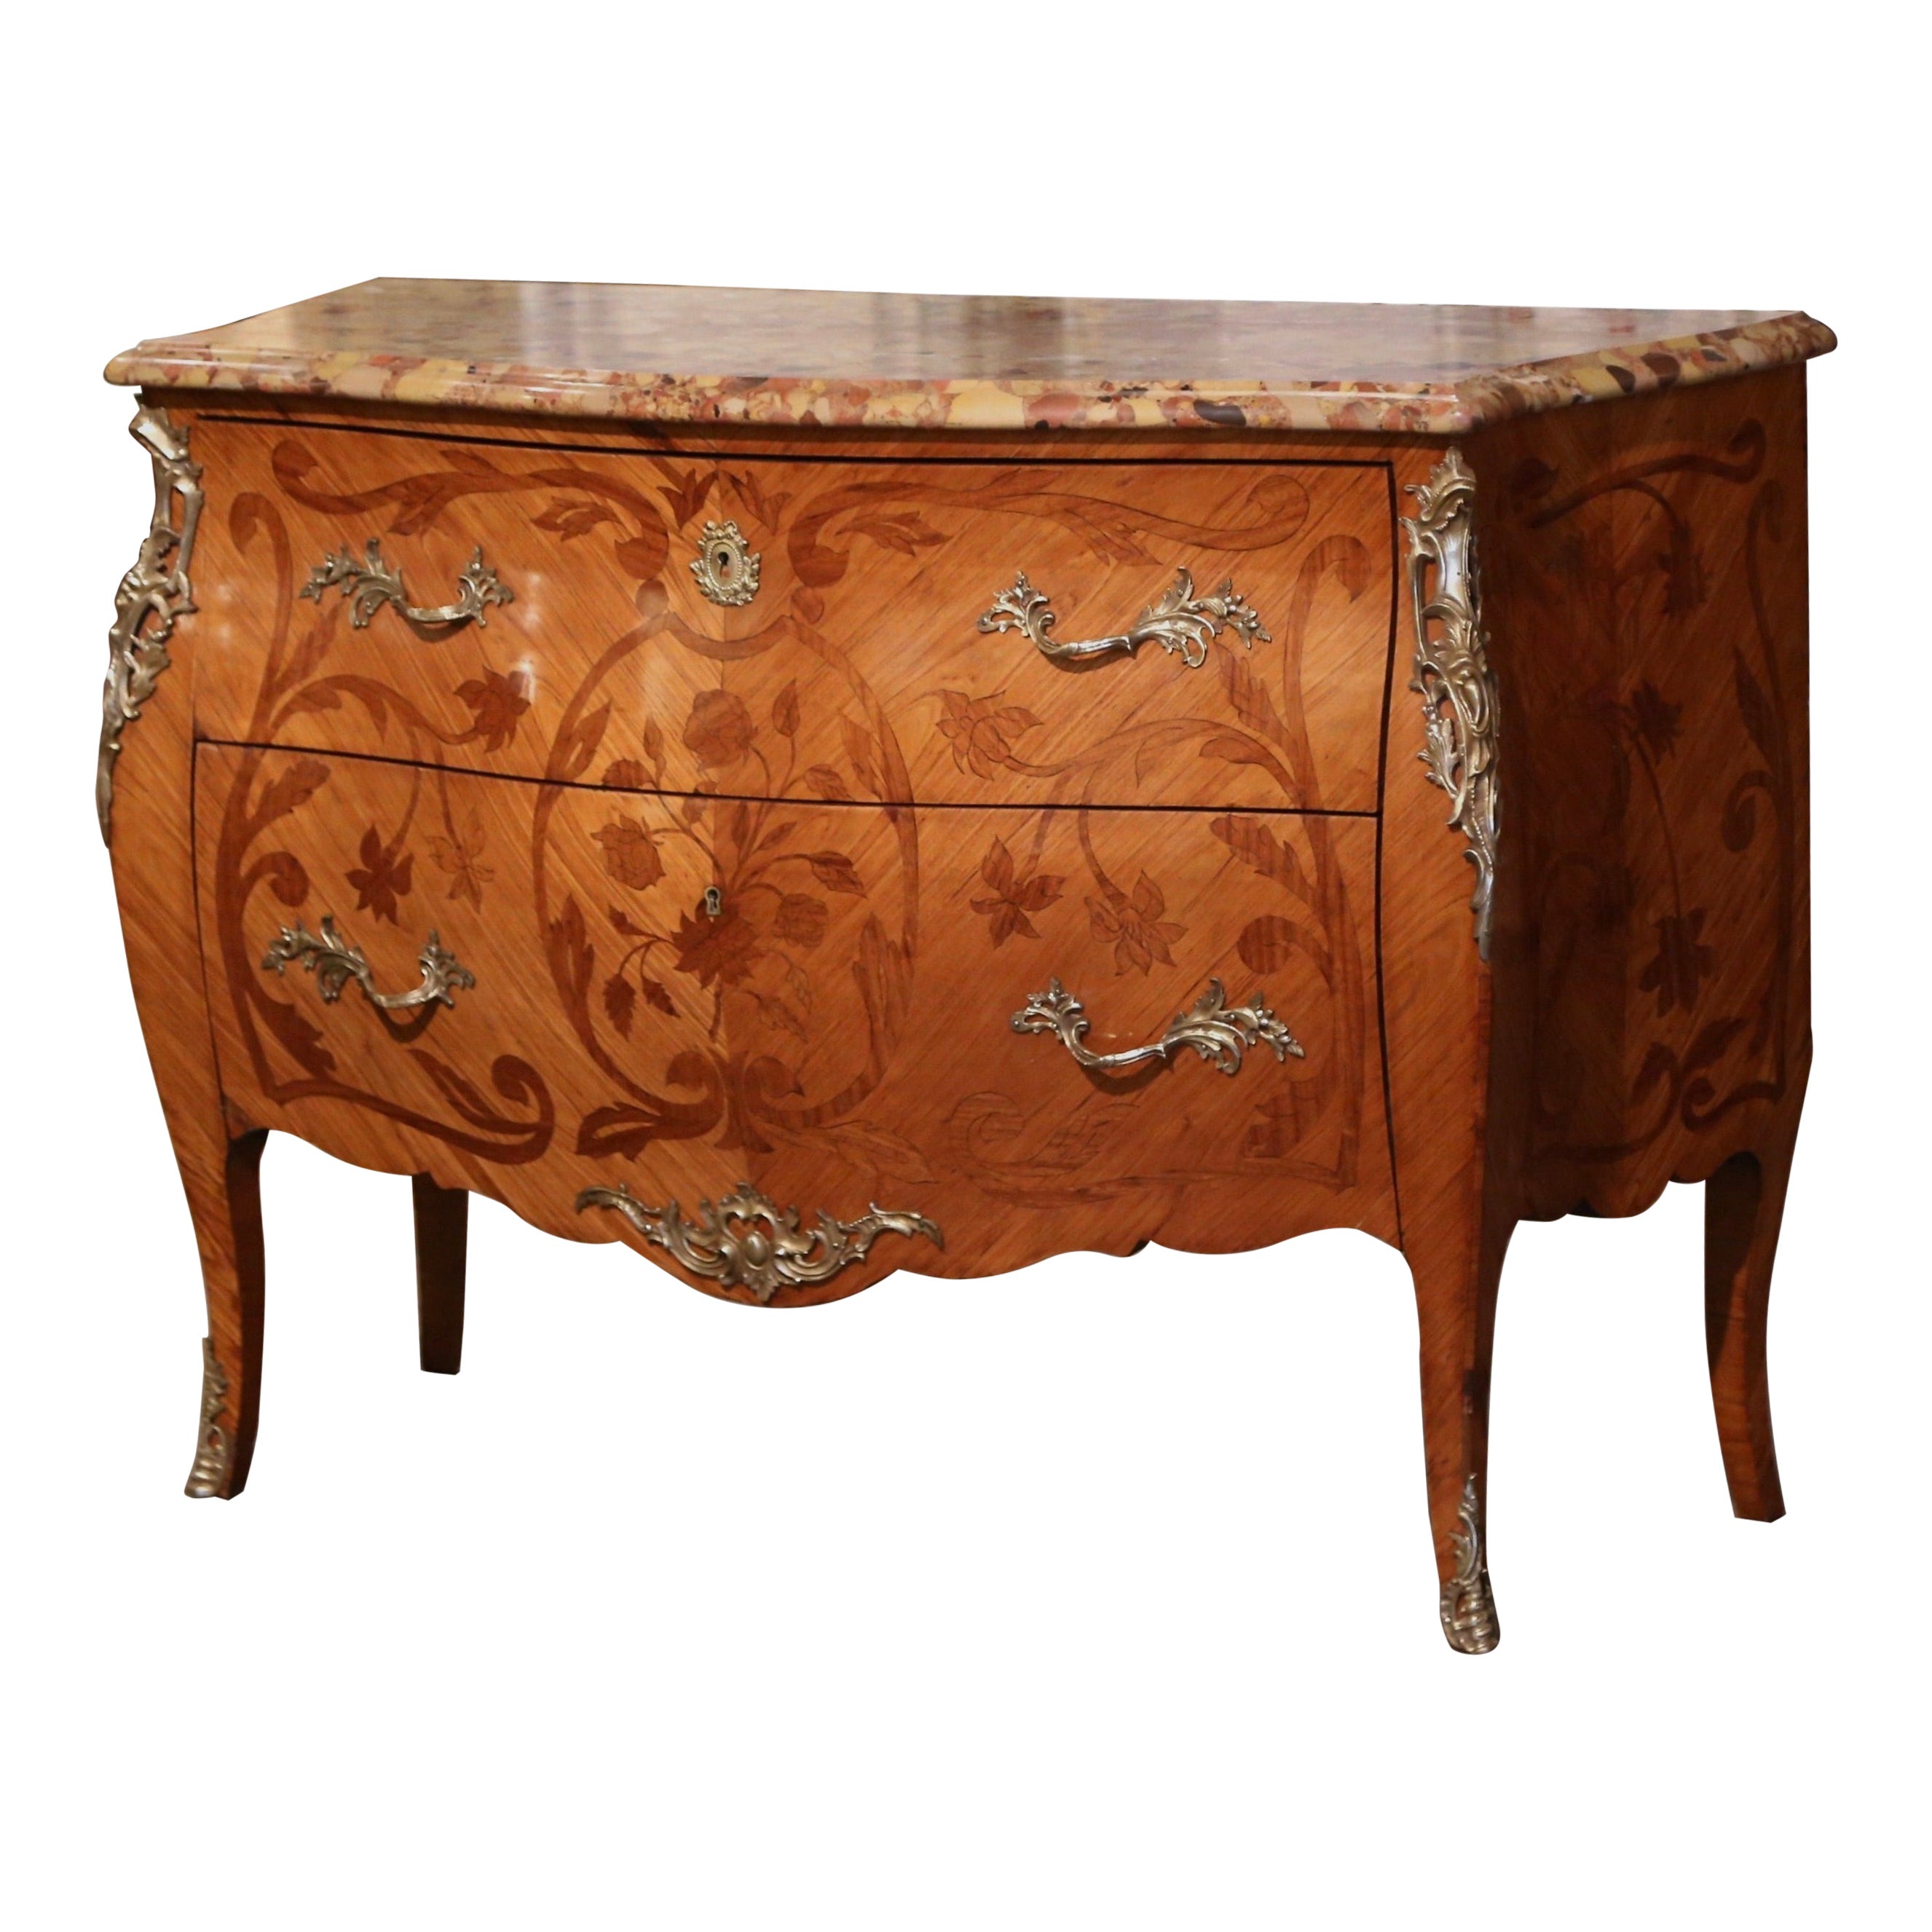 Late 19th Century Louis XV Marble Top Marquetry & Ormolu Bombe Chest of Drawers For Sale